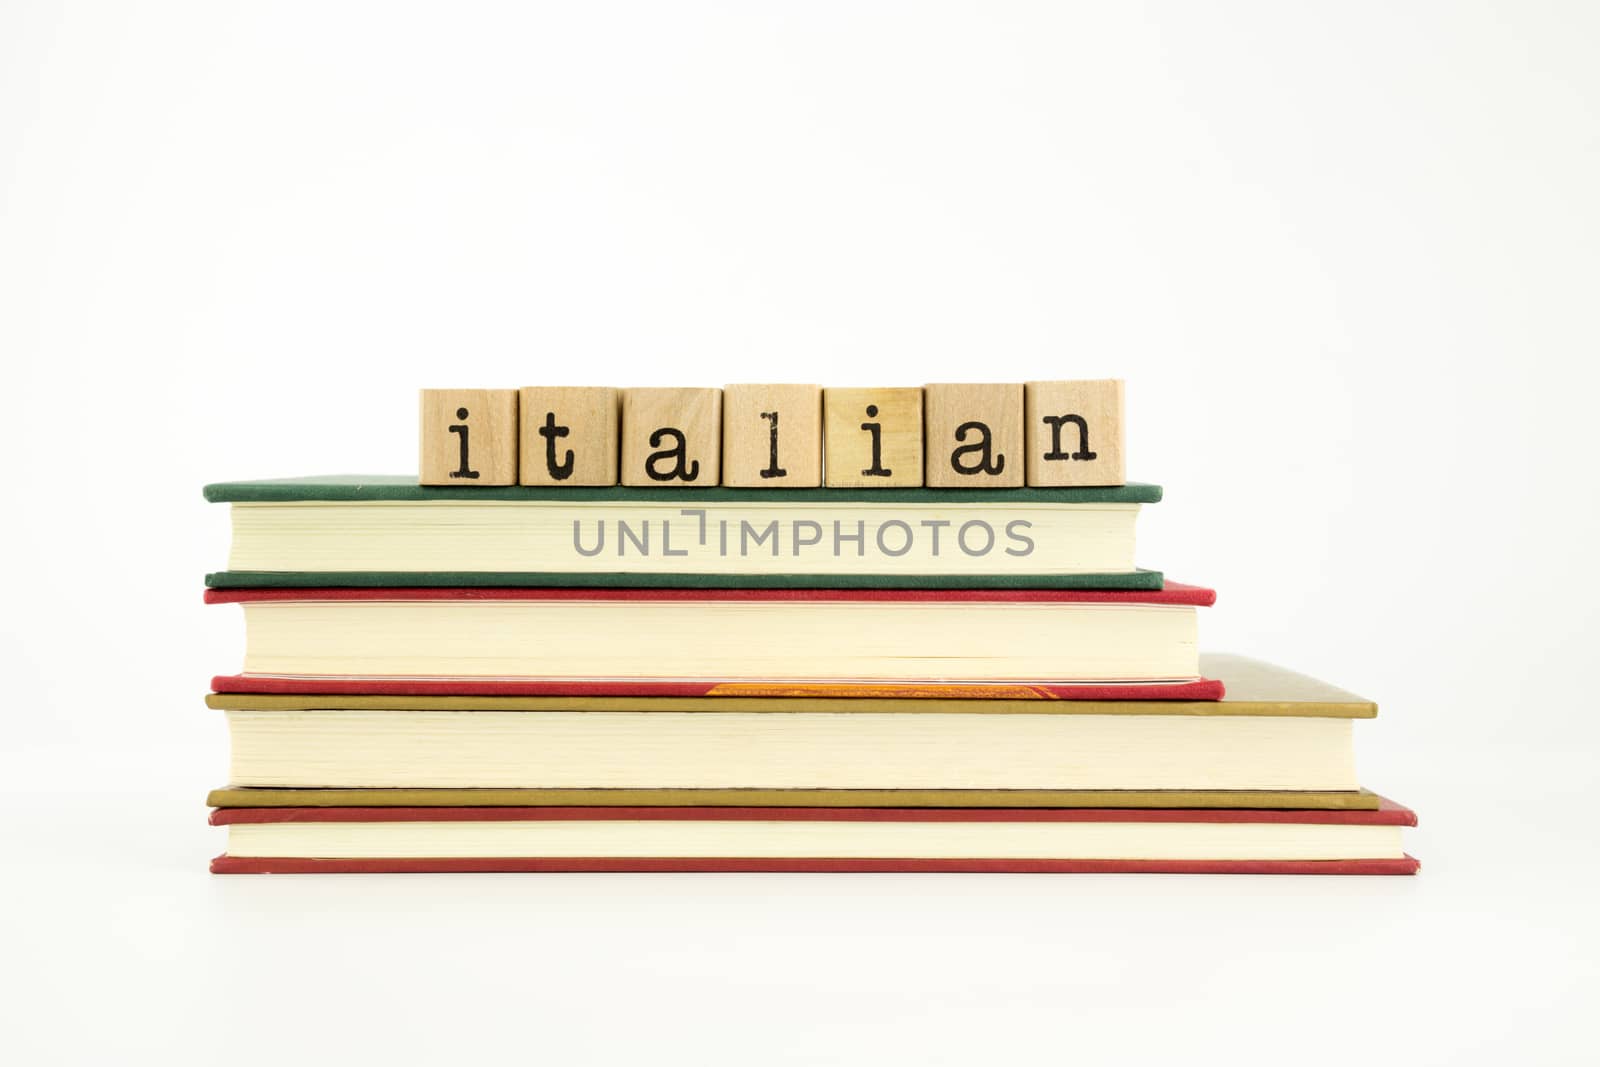 italian word on wood stamps stack on books, foreign language and translation concept